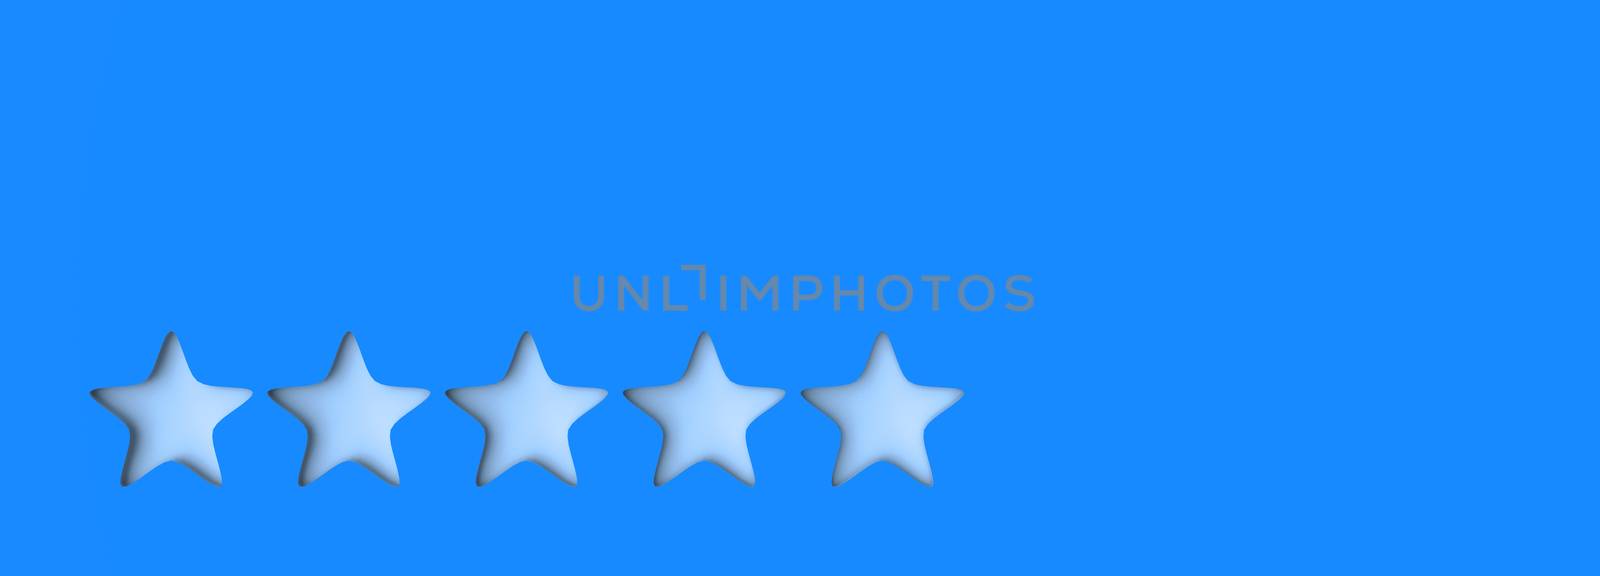 3d five blue star on color background. Render and illustration of golden star for premium reviews by Andreajk3